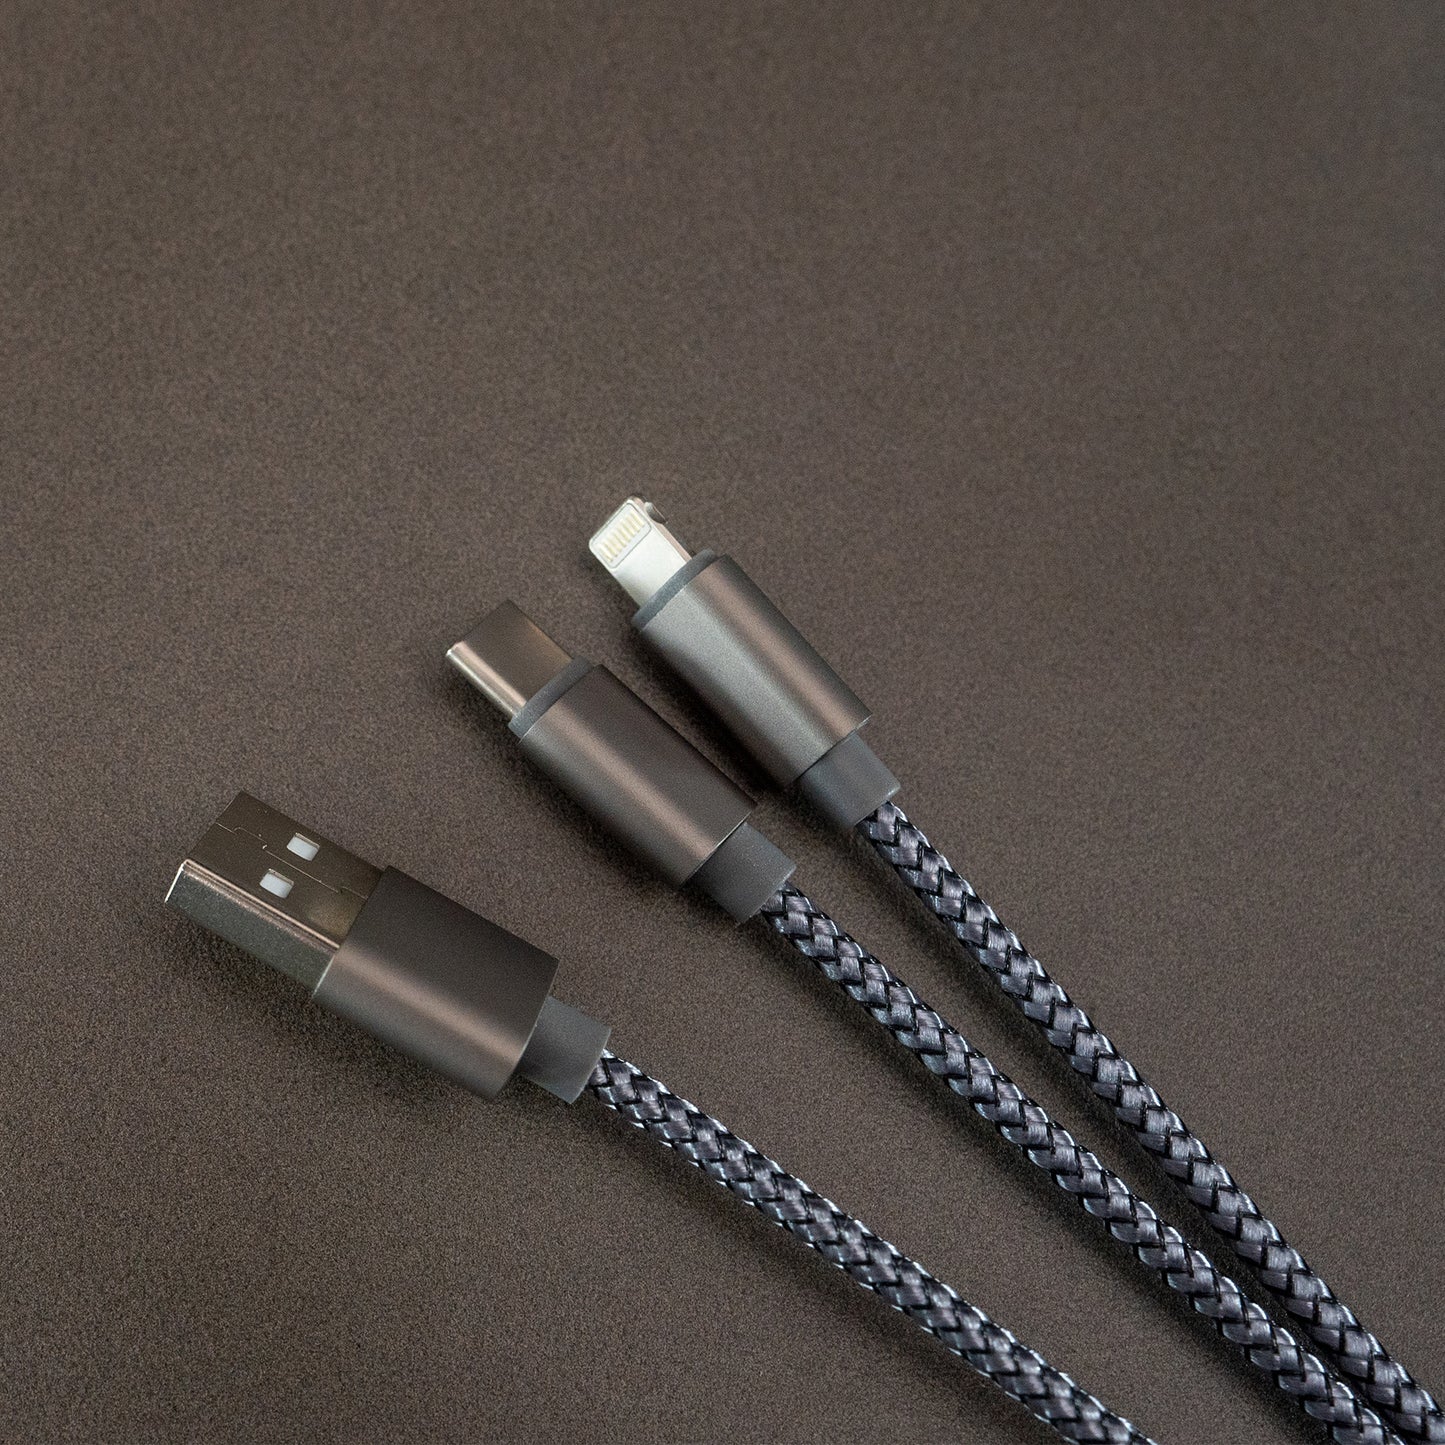 3 way charging cable - Ceres